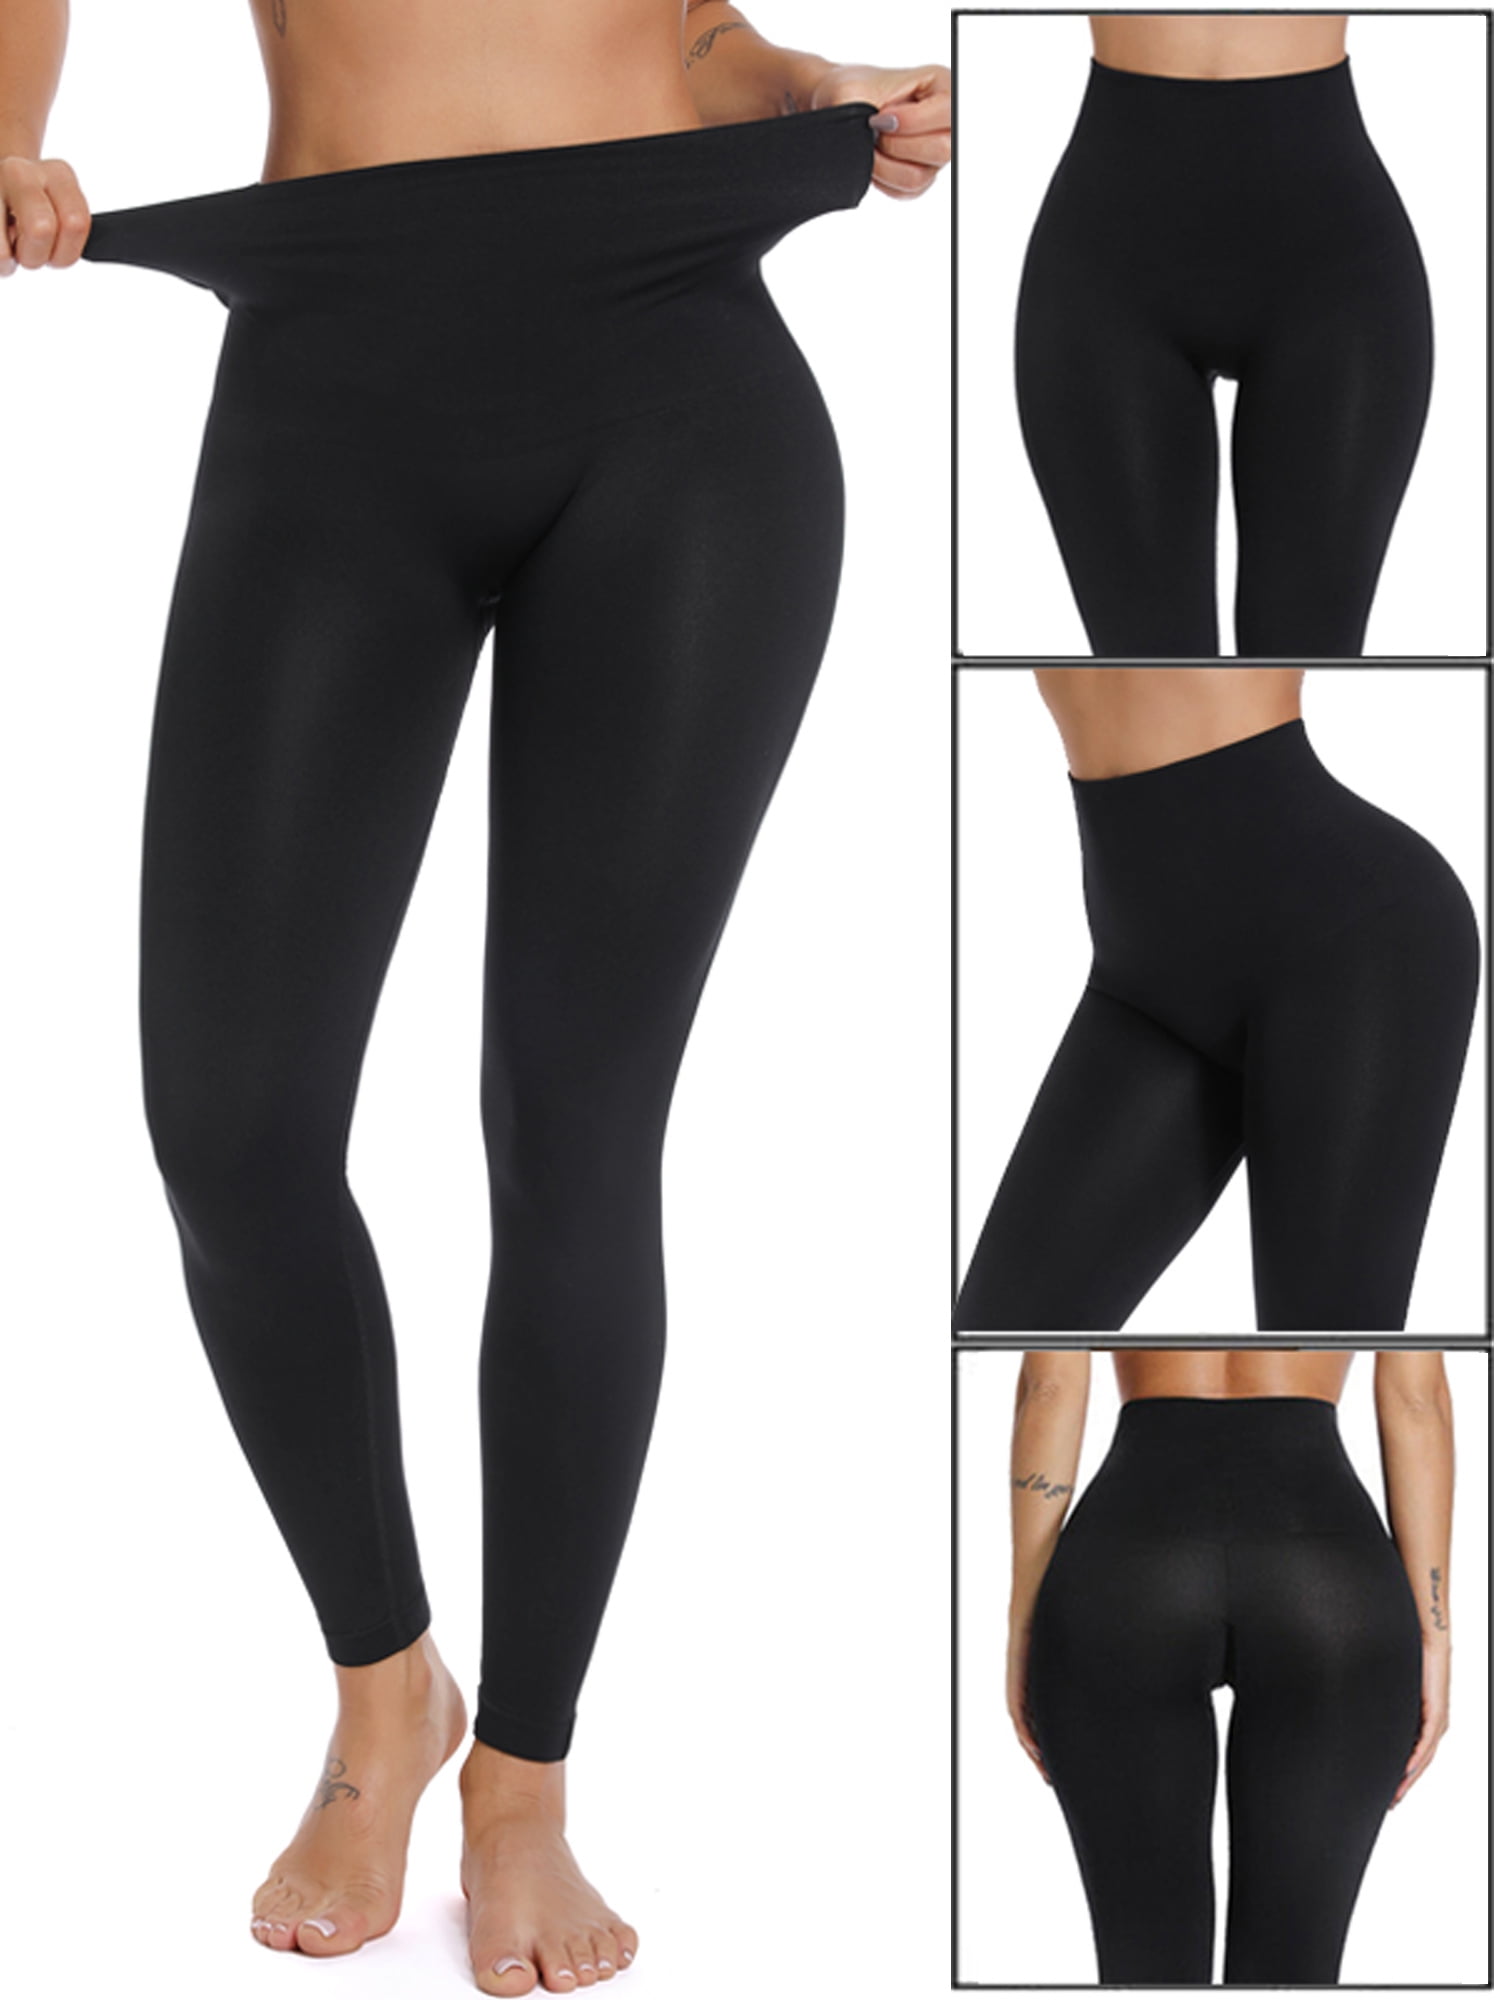 DICCO 2 Pack Maternity Leggings for Women Over The Belly Comfortable Workout Yoga Women Shaper Pants for Pregnancy 